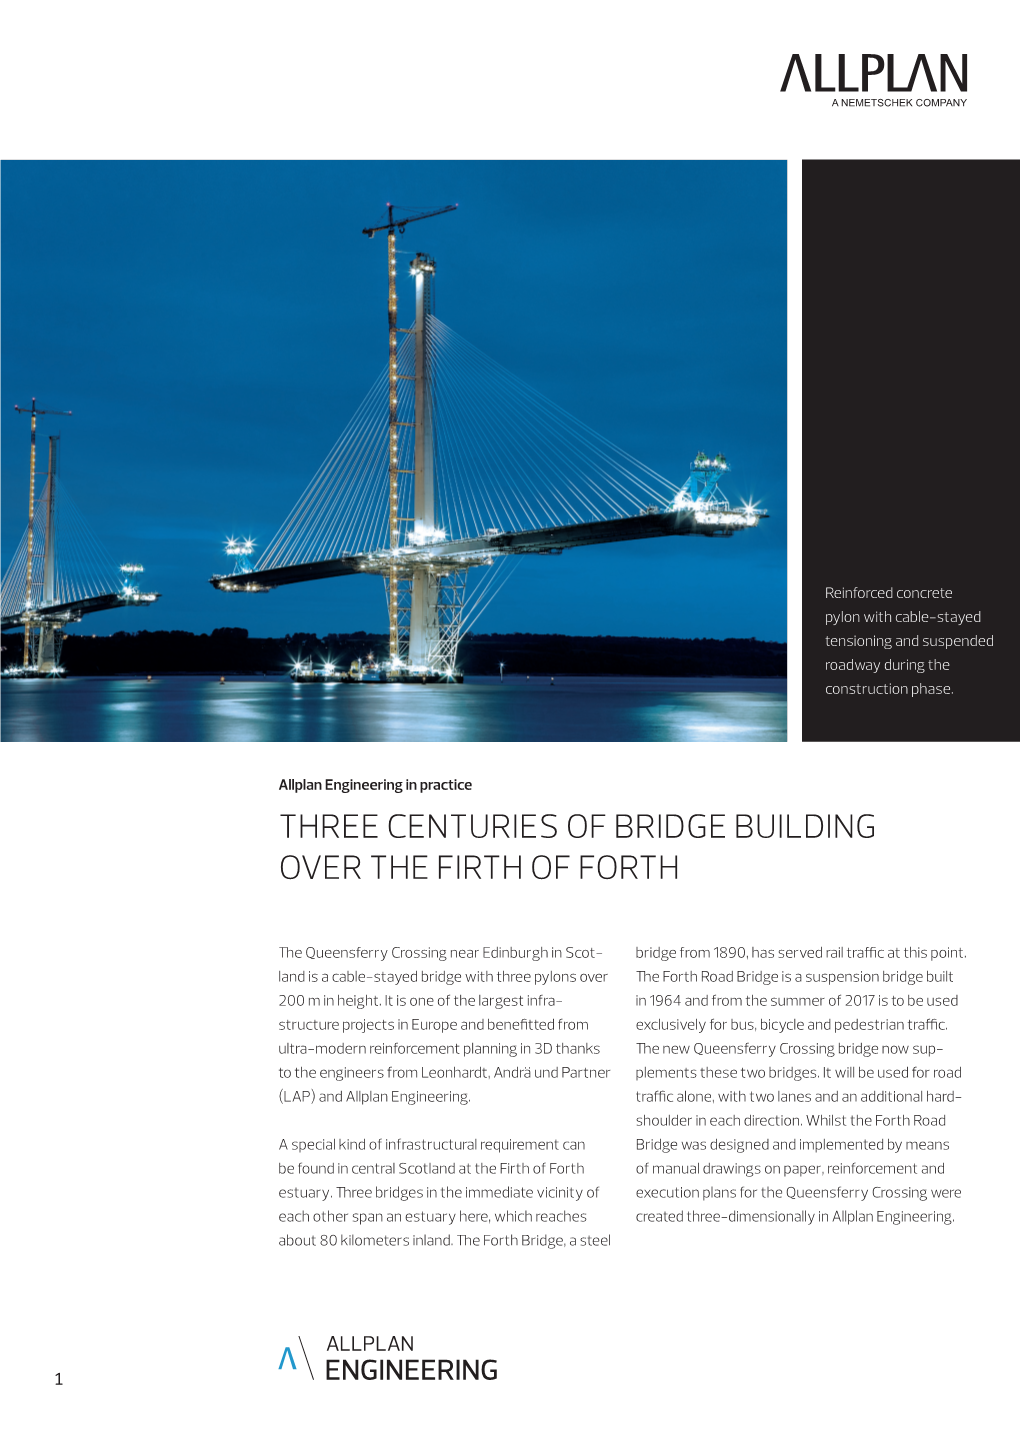 Three Centuries of Bridge Building Over the Firth of Forth